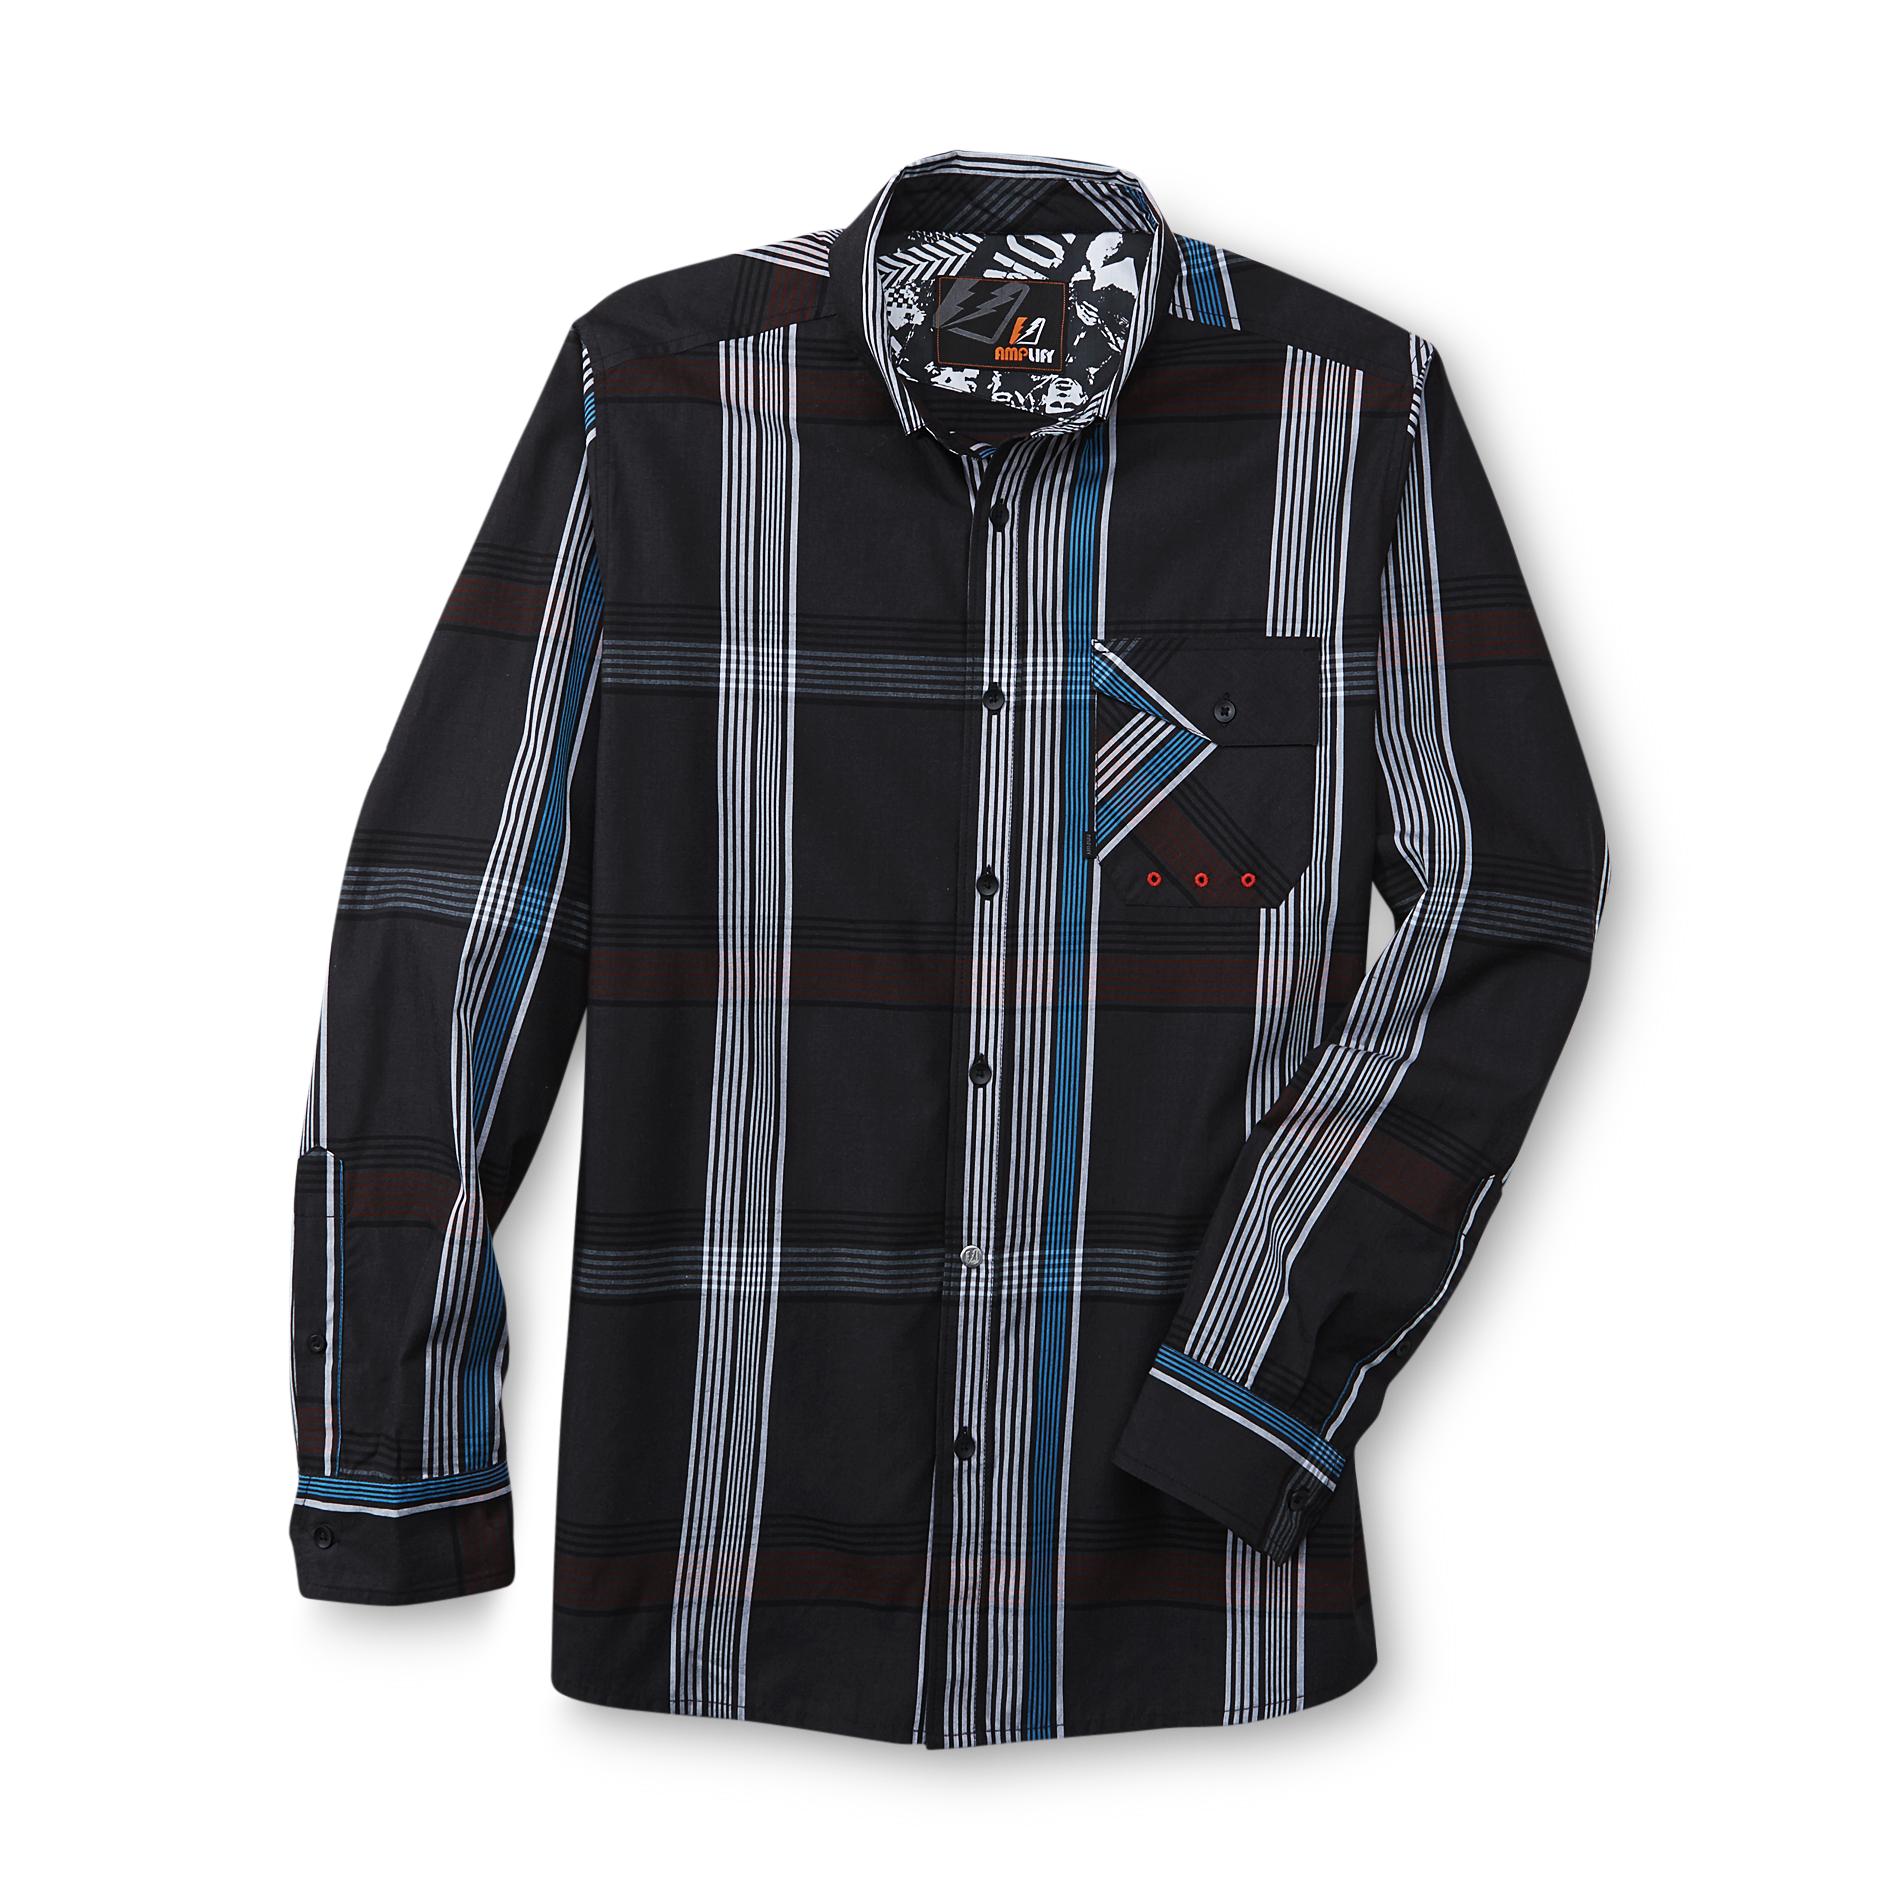 Amplify Young Men's Casual Shirt - Plaid